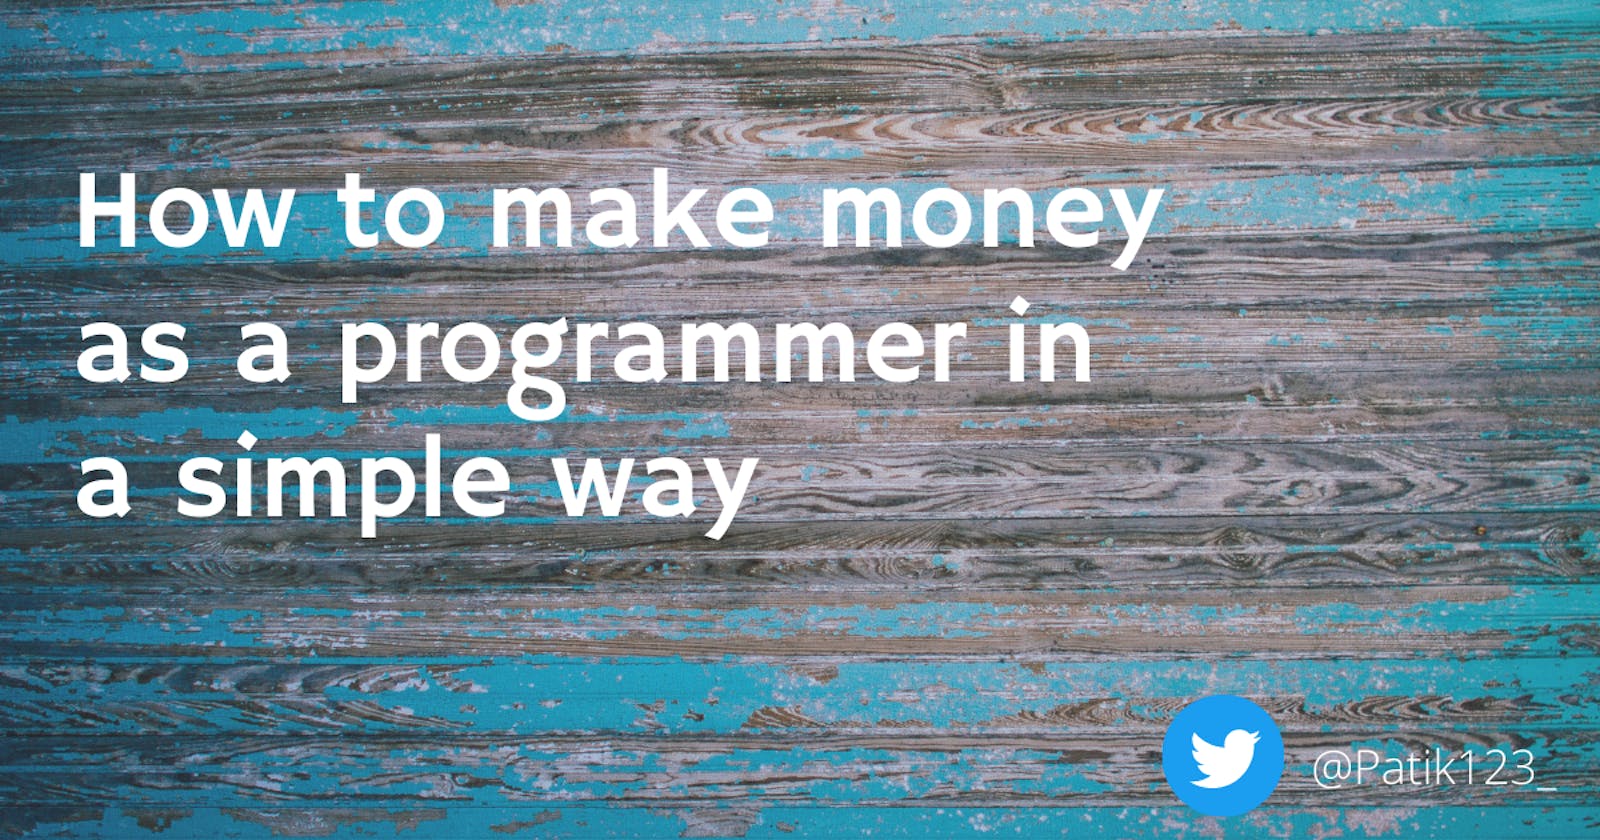 How to make money as a programmer in a simple way🤑